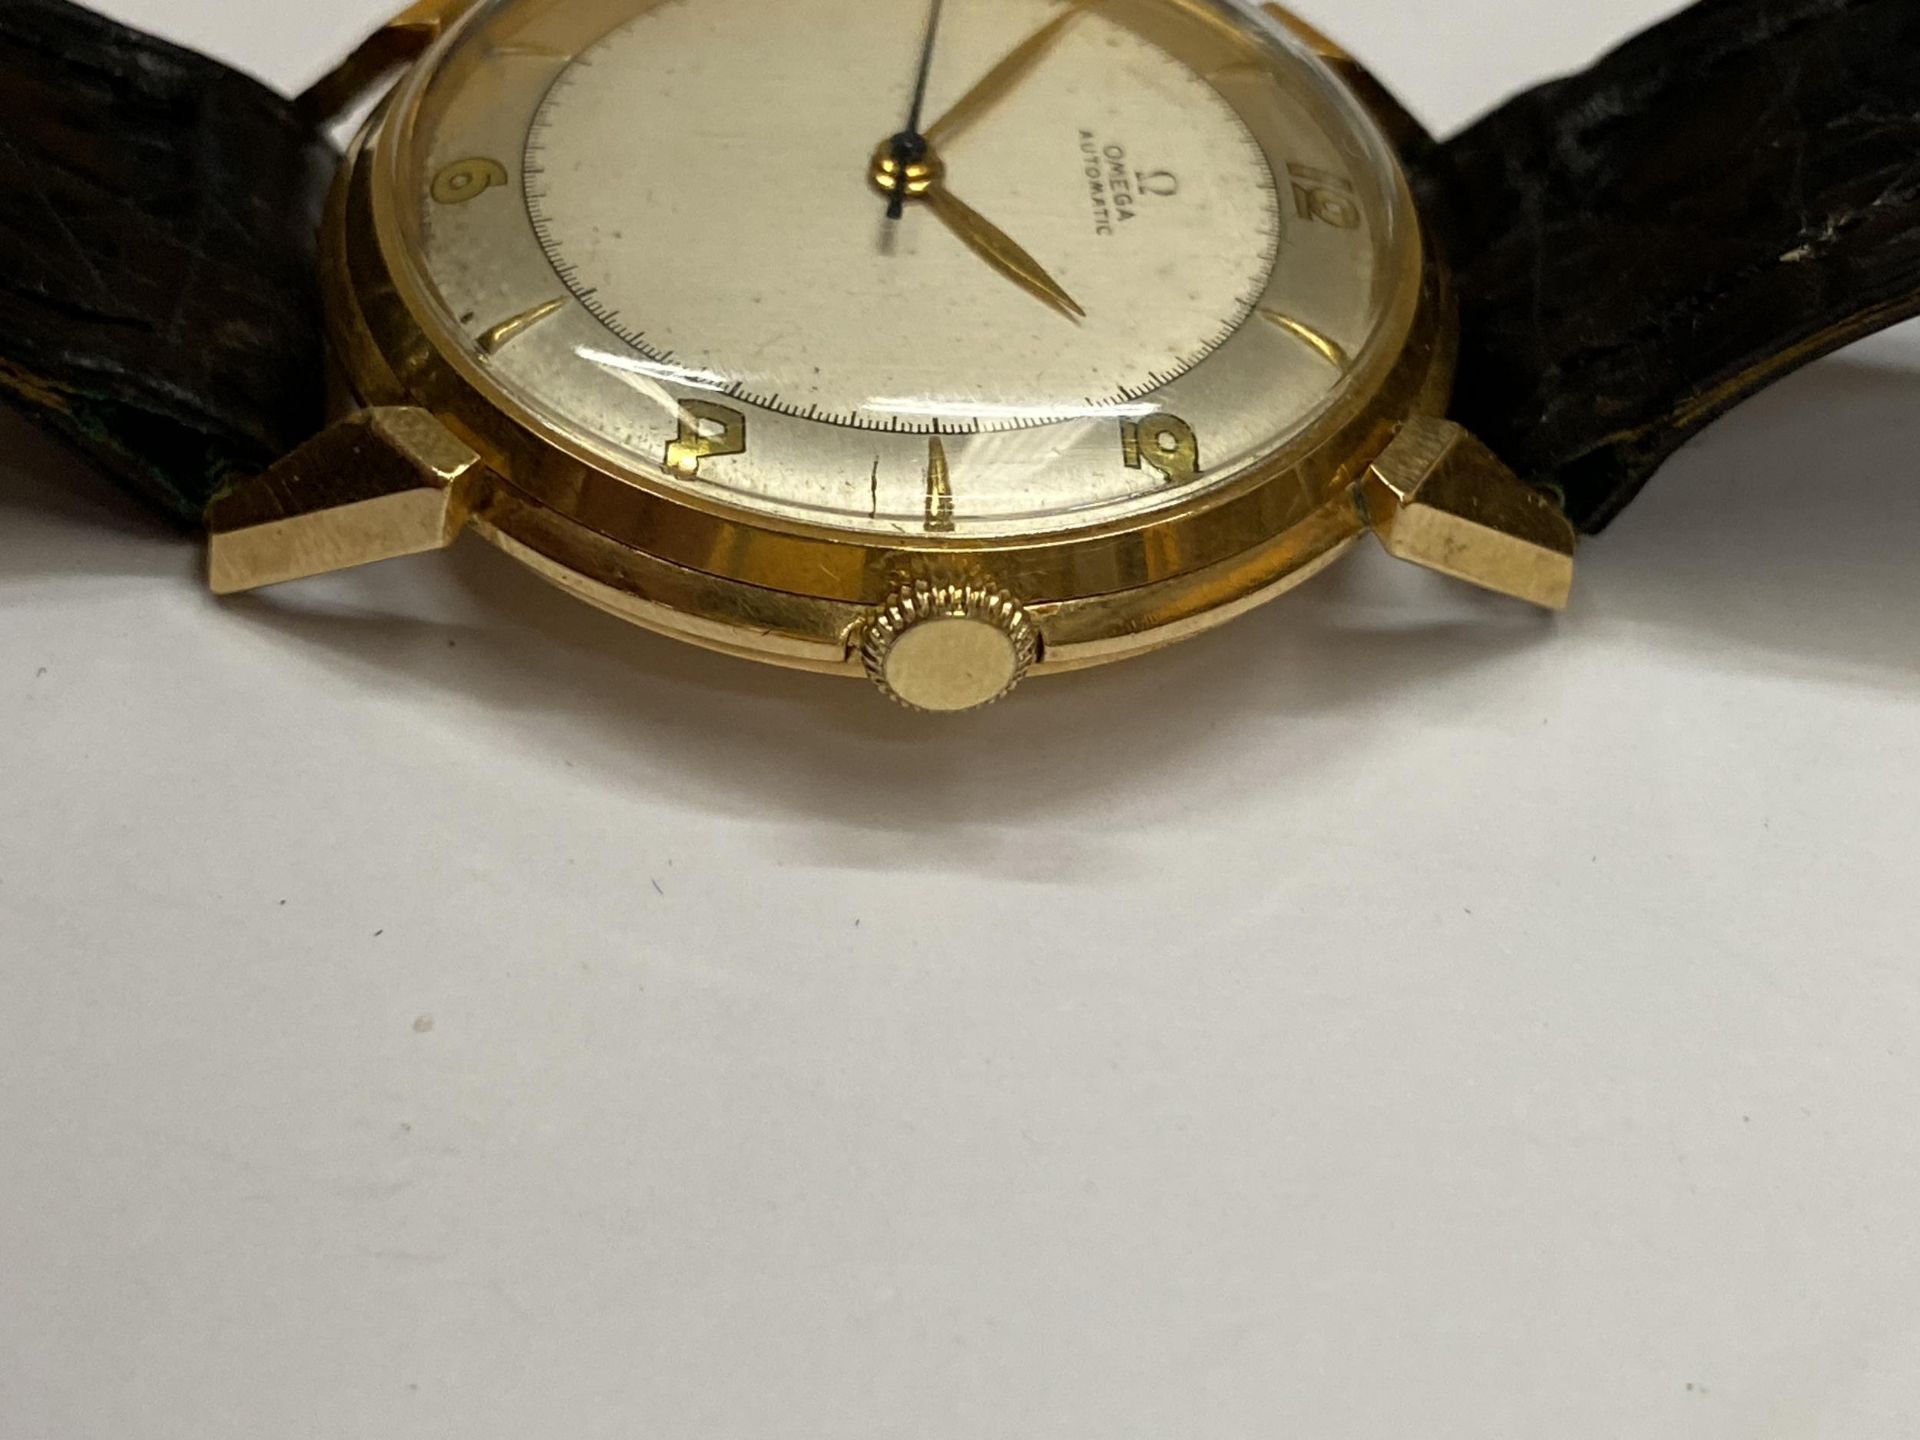 A 1940'S OMEGA BUMPER AUTOMATIC WATCH, YELLOW METAL UNMARKED CASE, WITH NON ORIGINAL BOX, WORKING AT - Image 2 of 8